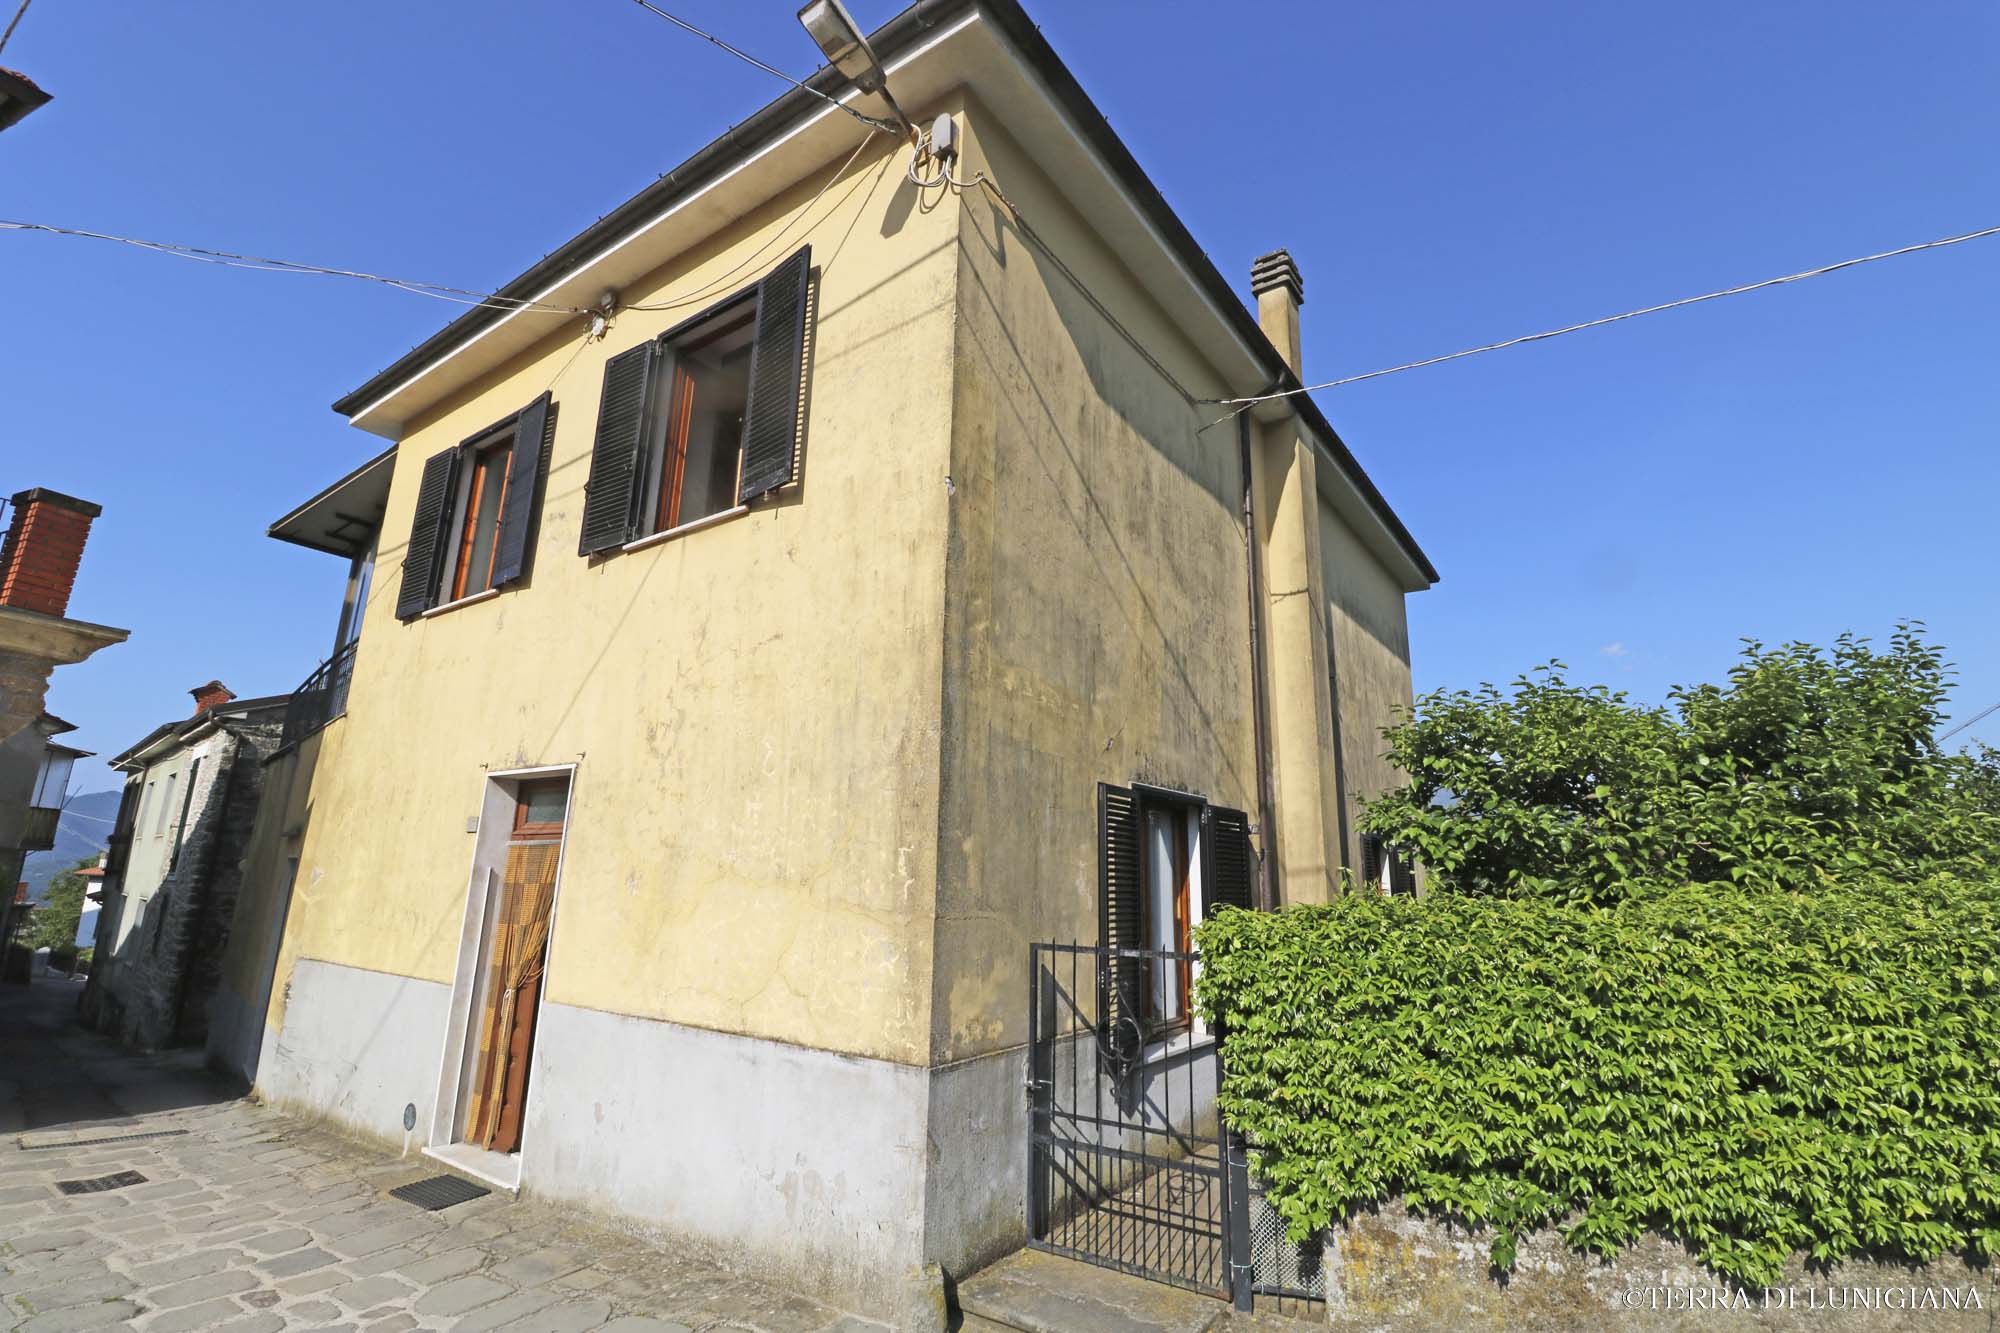 L’ ORZO – Detached House with Garden and Land